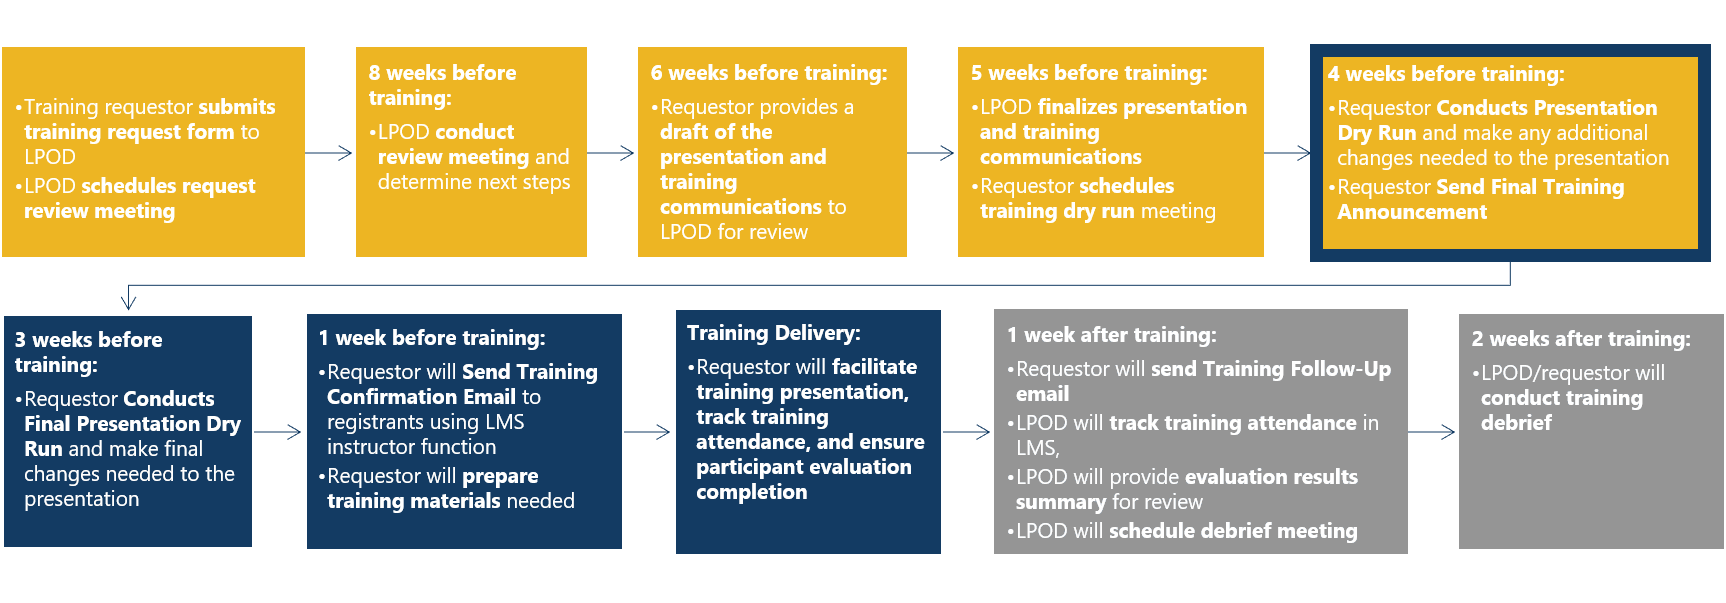 TD Request Process Graphic 12.09.2020